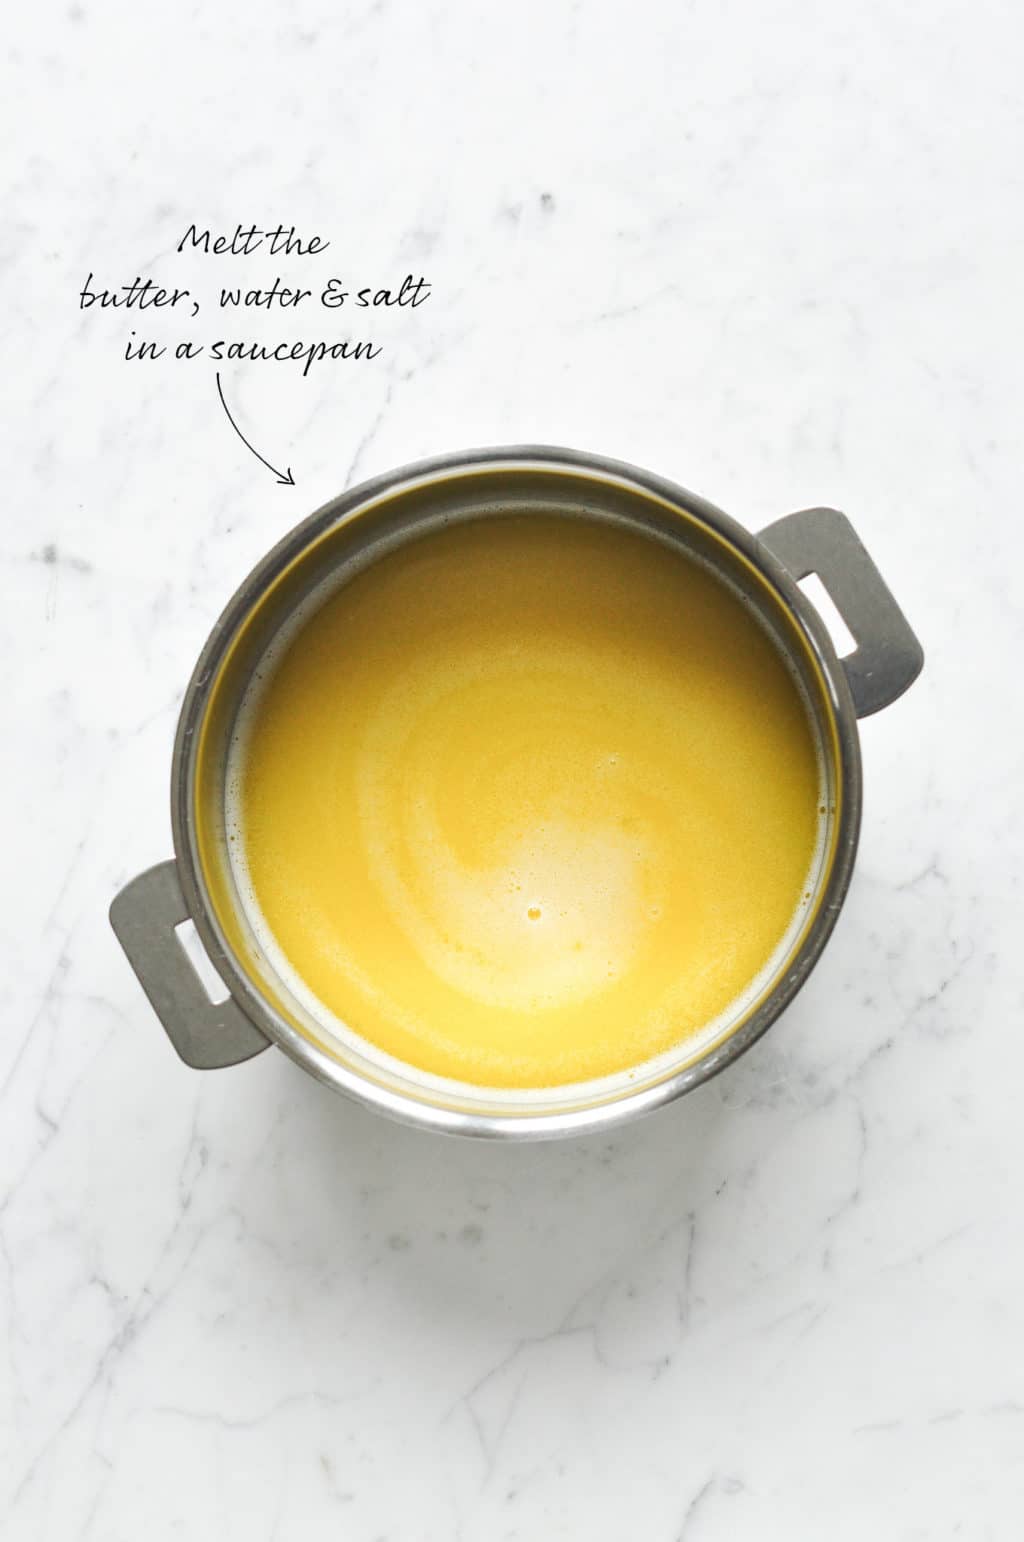 How to make choux pastry. Melt the butter, water and salt in a saucepan.